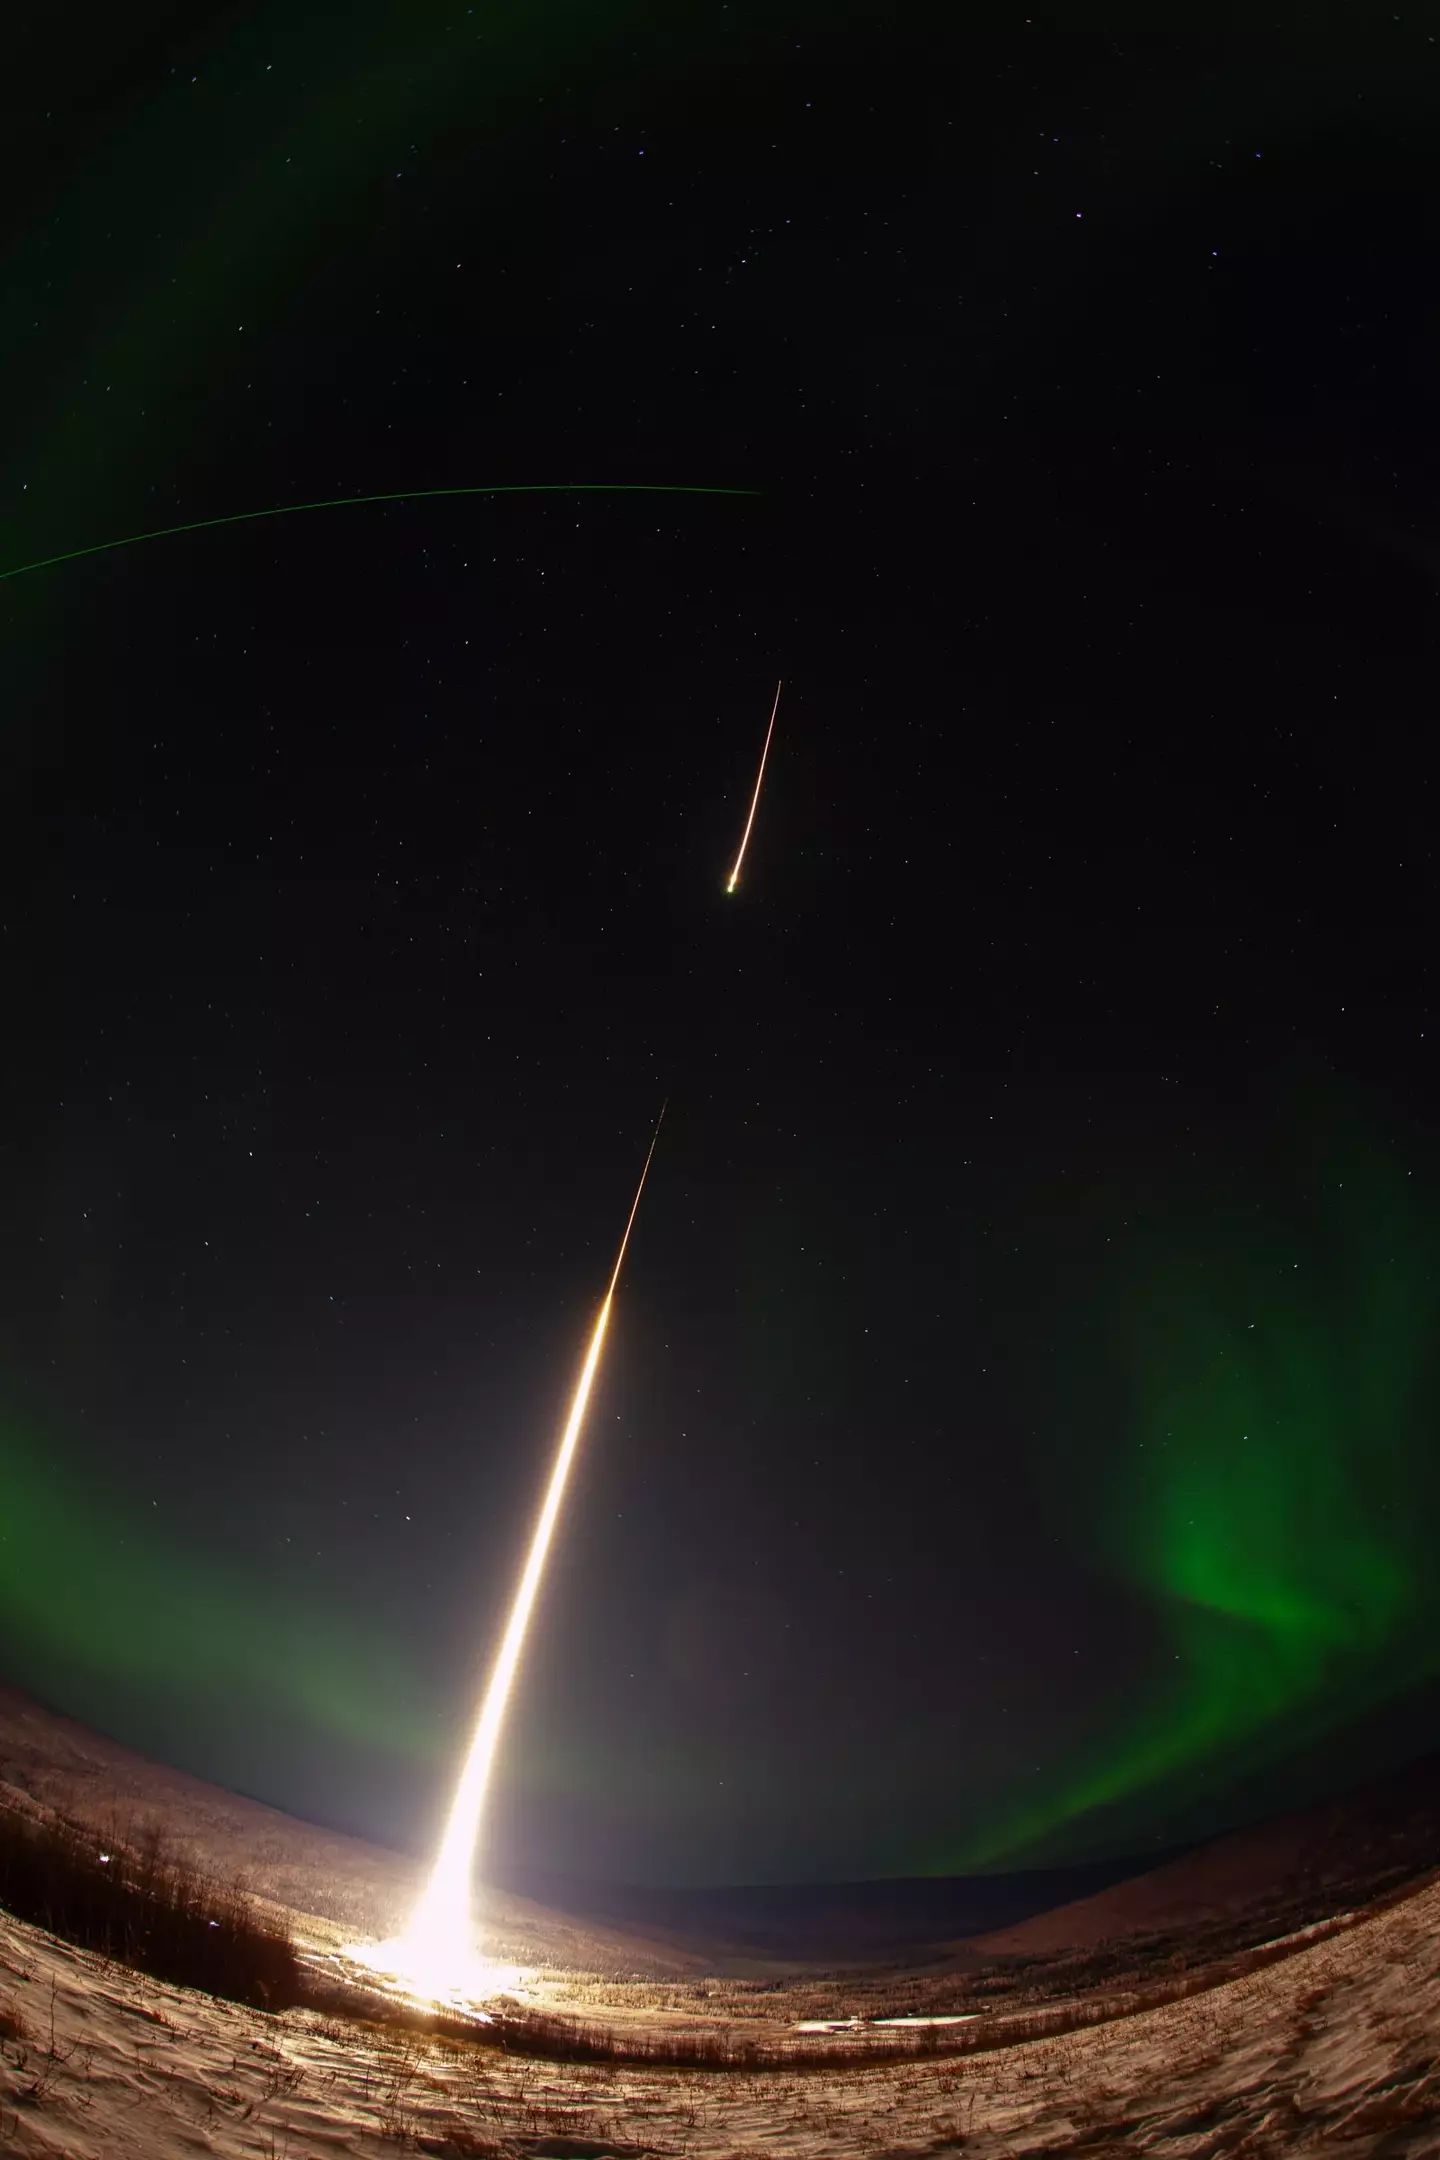 The viral video shows the beautiful green hue of the aurora borealis interrupted by the rocket launch.